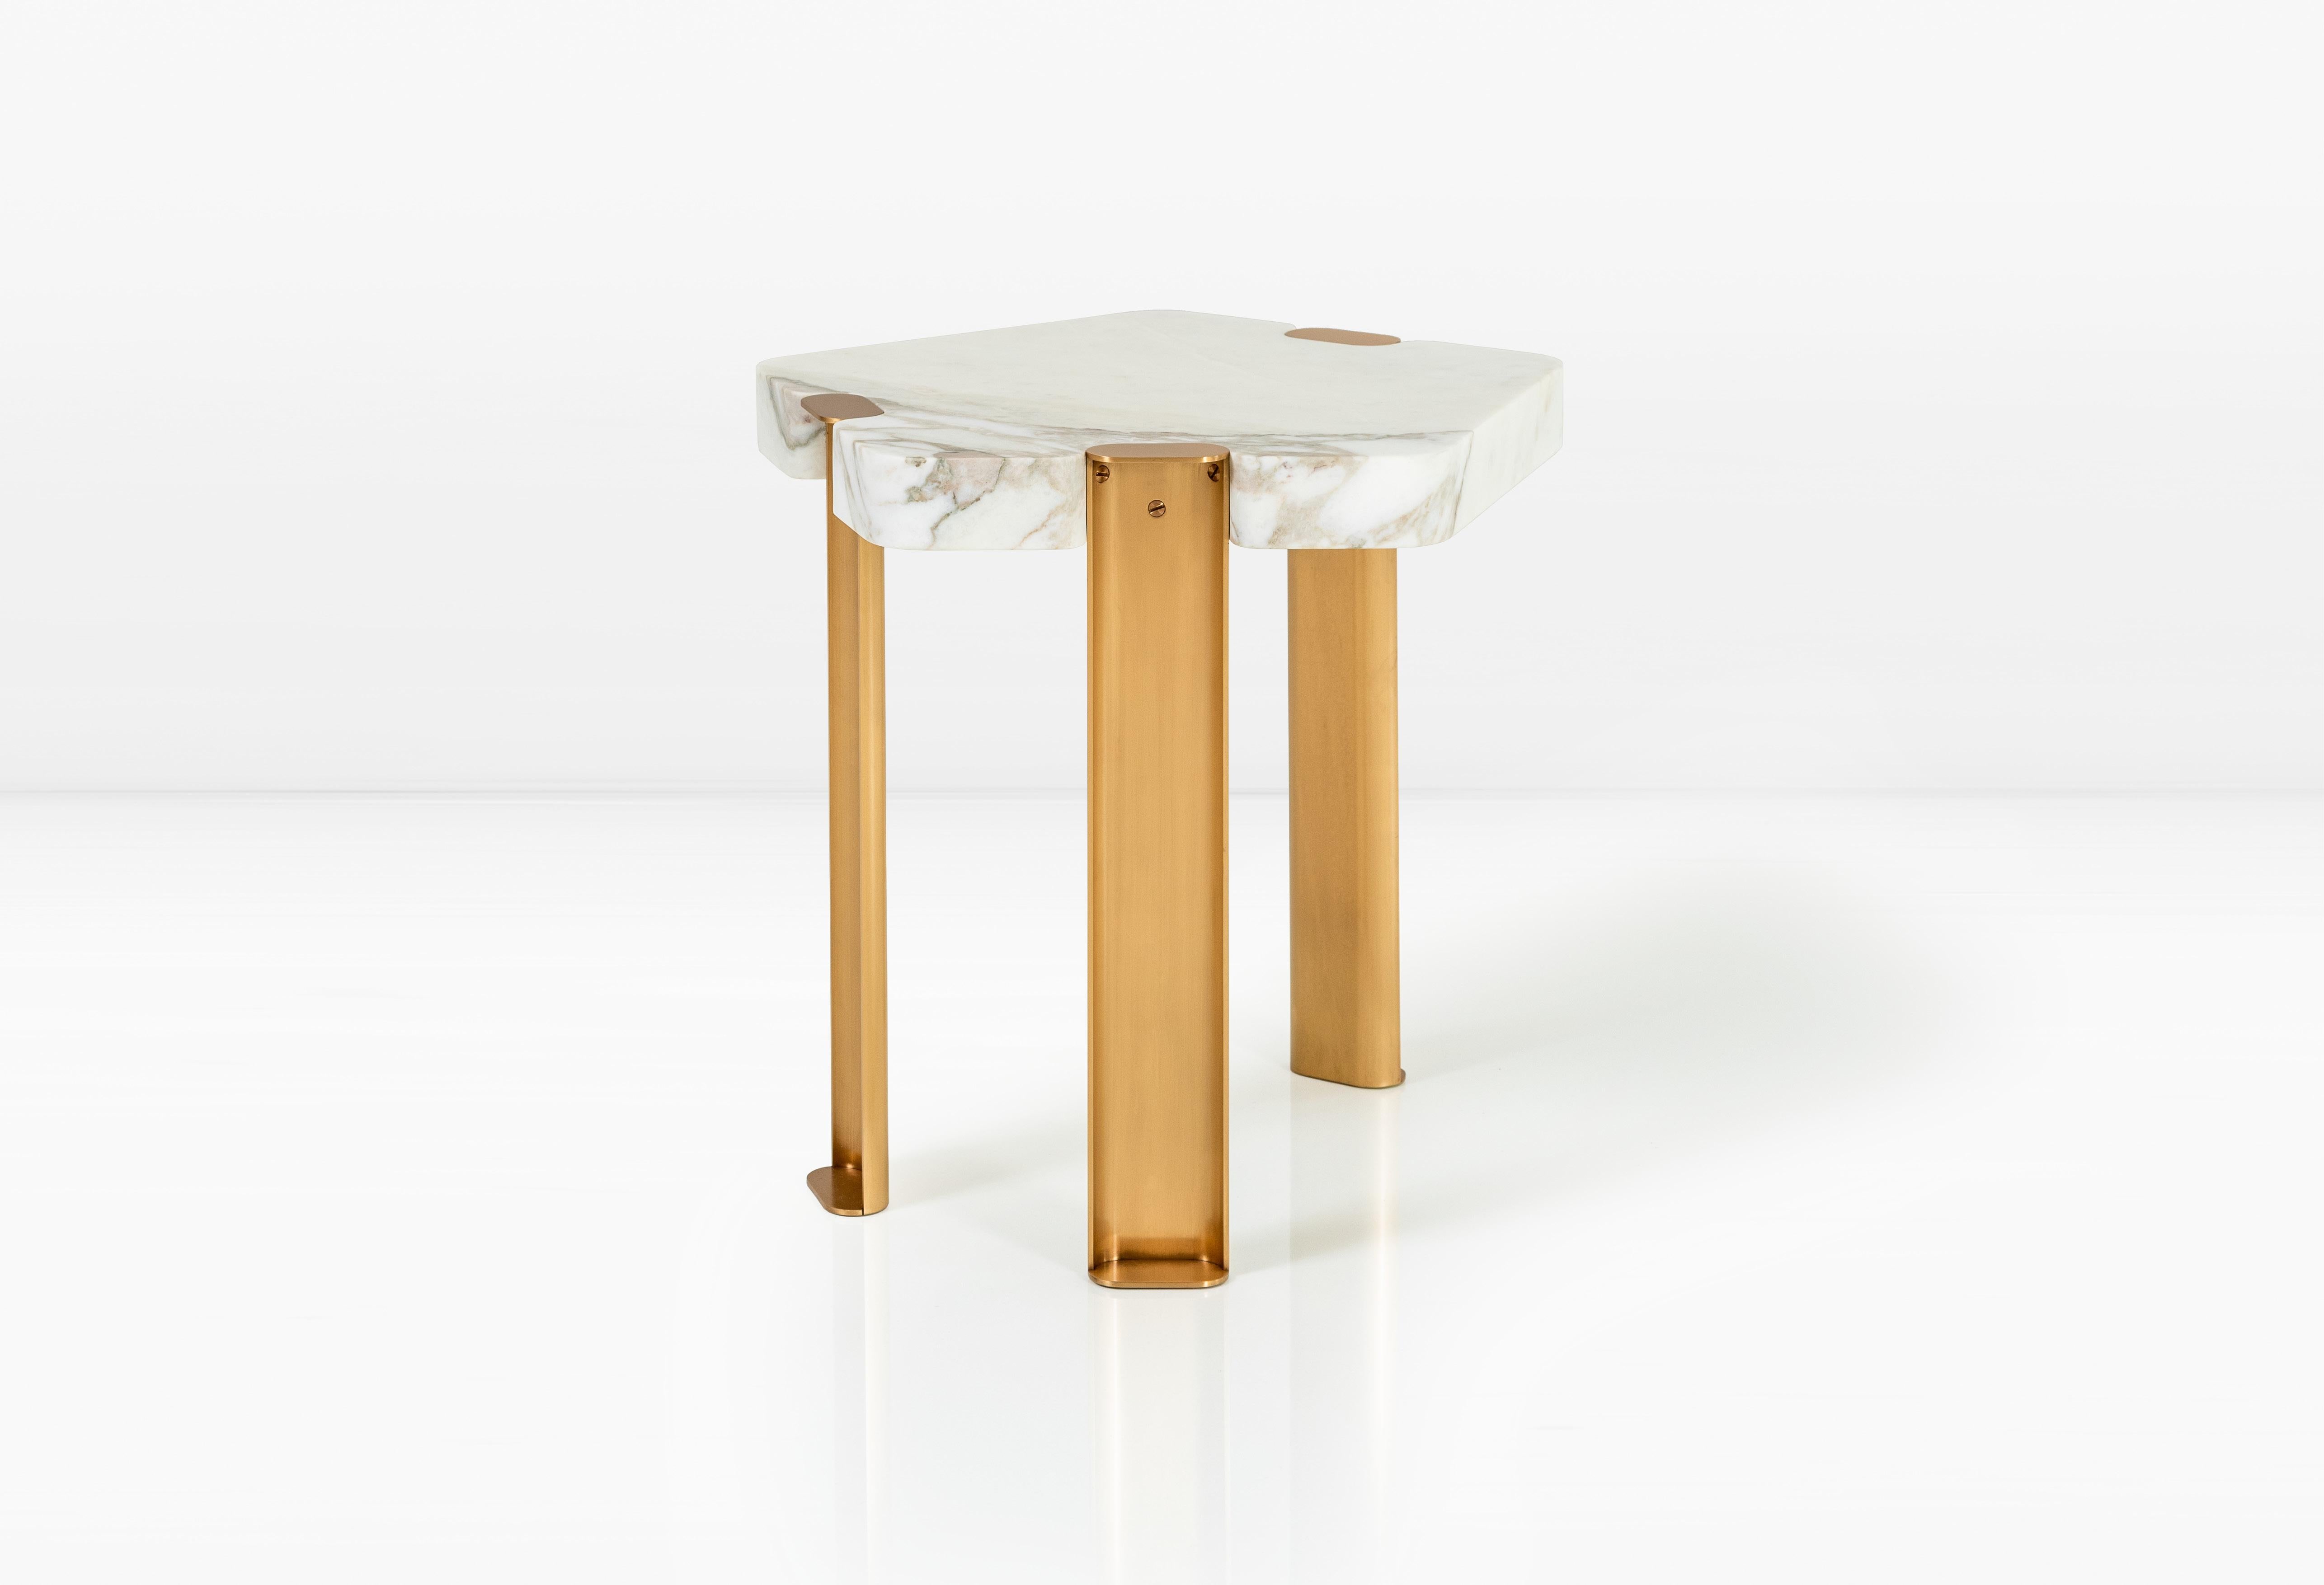 The Laguna side table is the exploration of a rarely used shape in design: the pentagon. The five-sided form of Calacatta Vagli marble is softened by the addition of lozenge shaped leg assemblies in solid bronze. The Laguna provides an unexpected